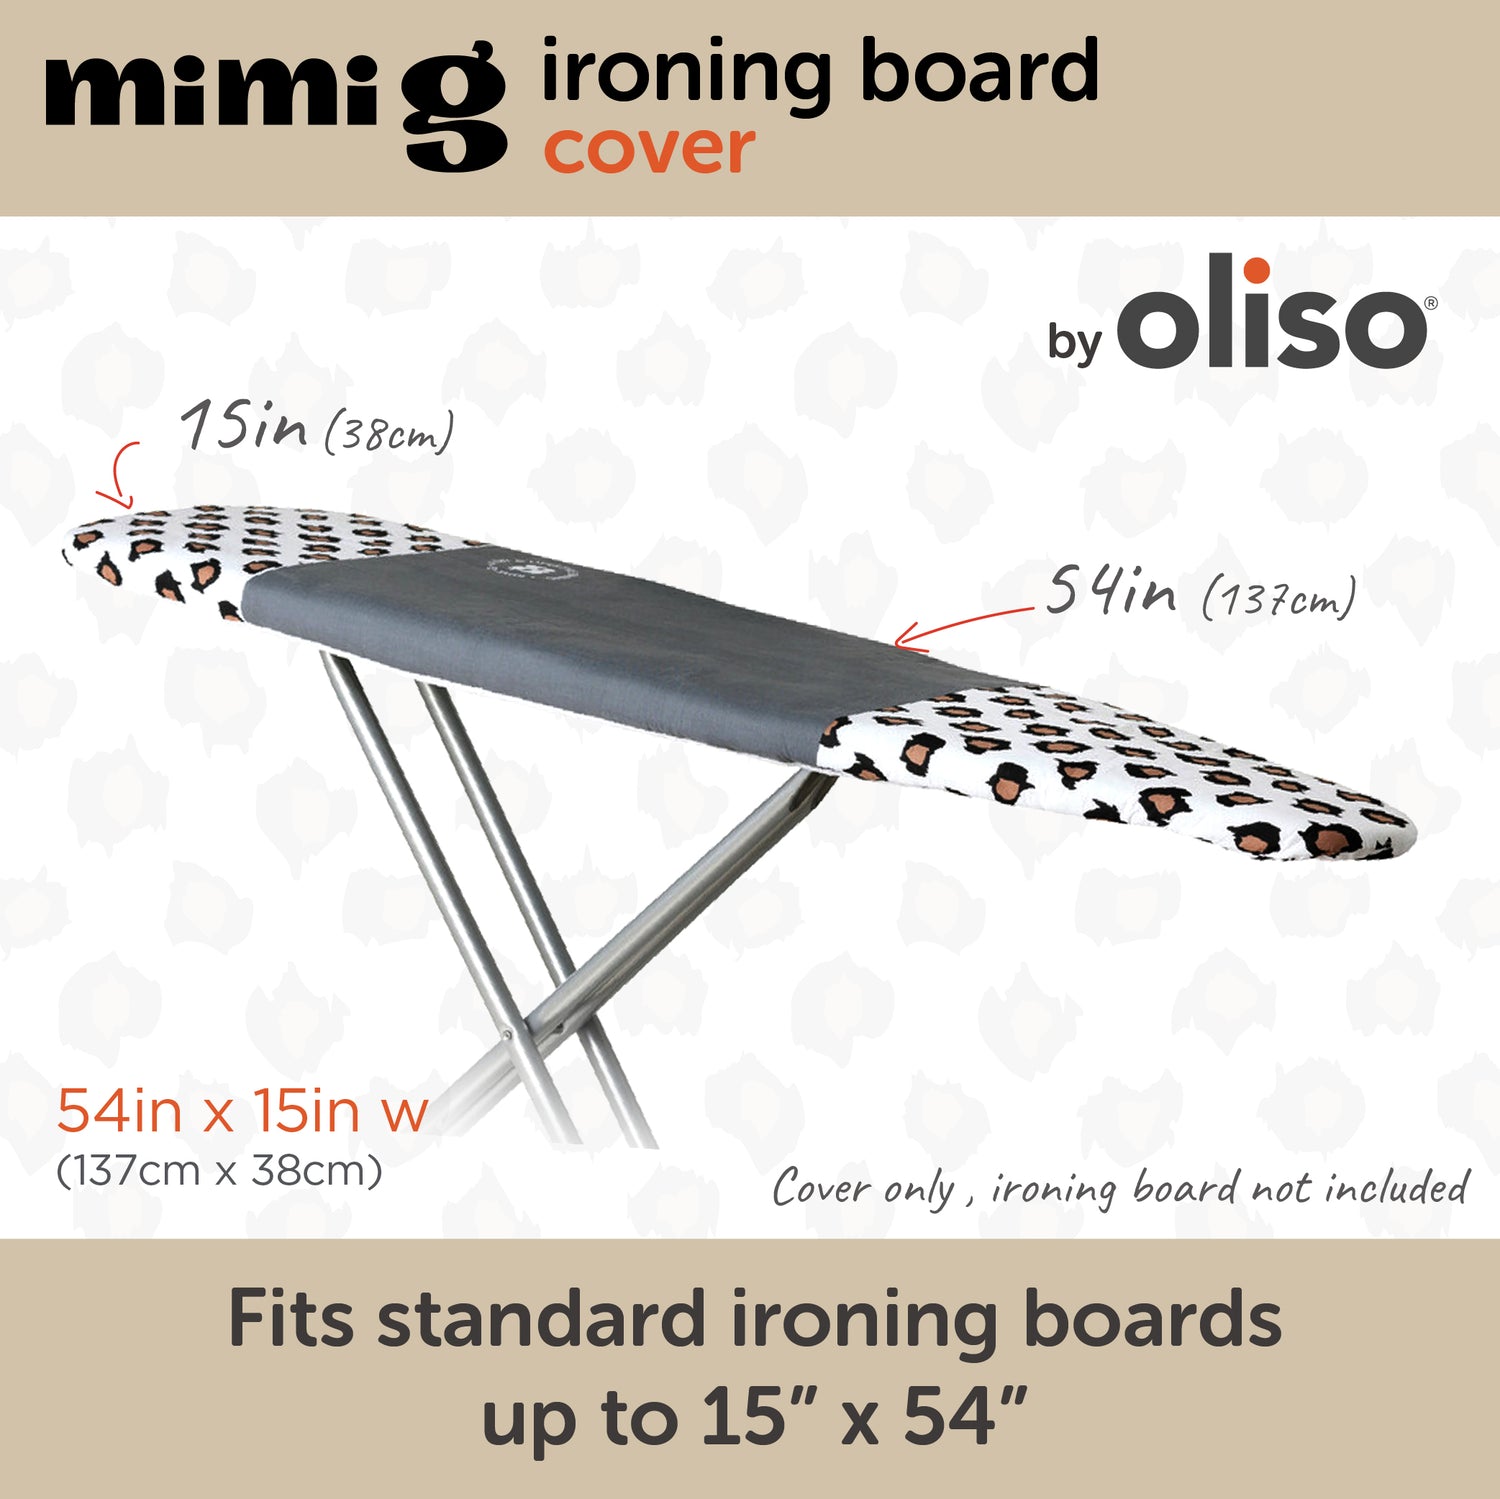 Best Ironing Board Cover - Buy Oliso Ironing Covers Online